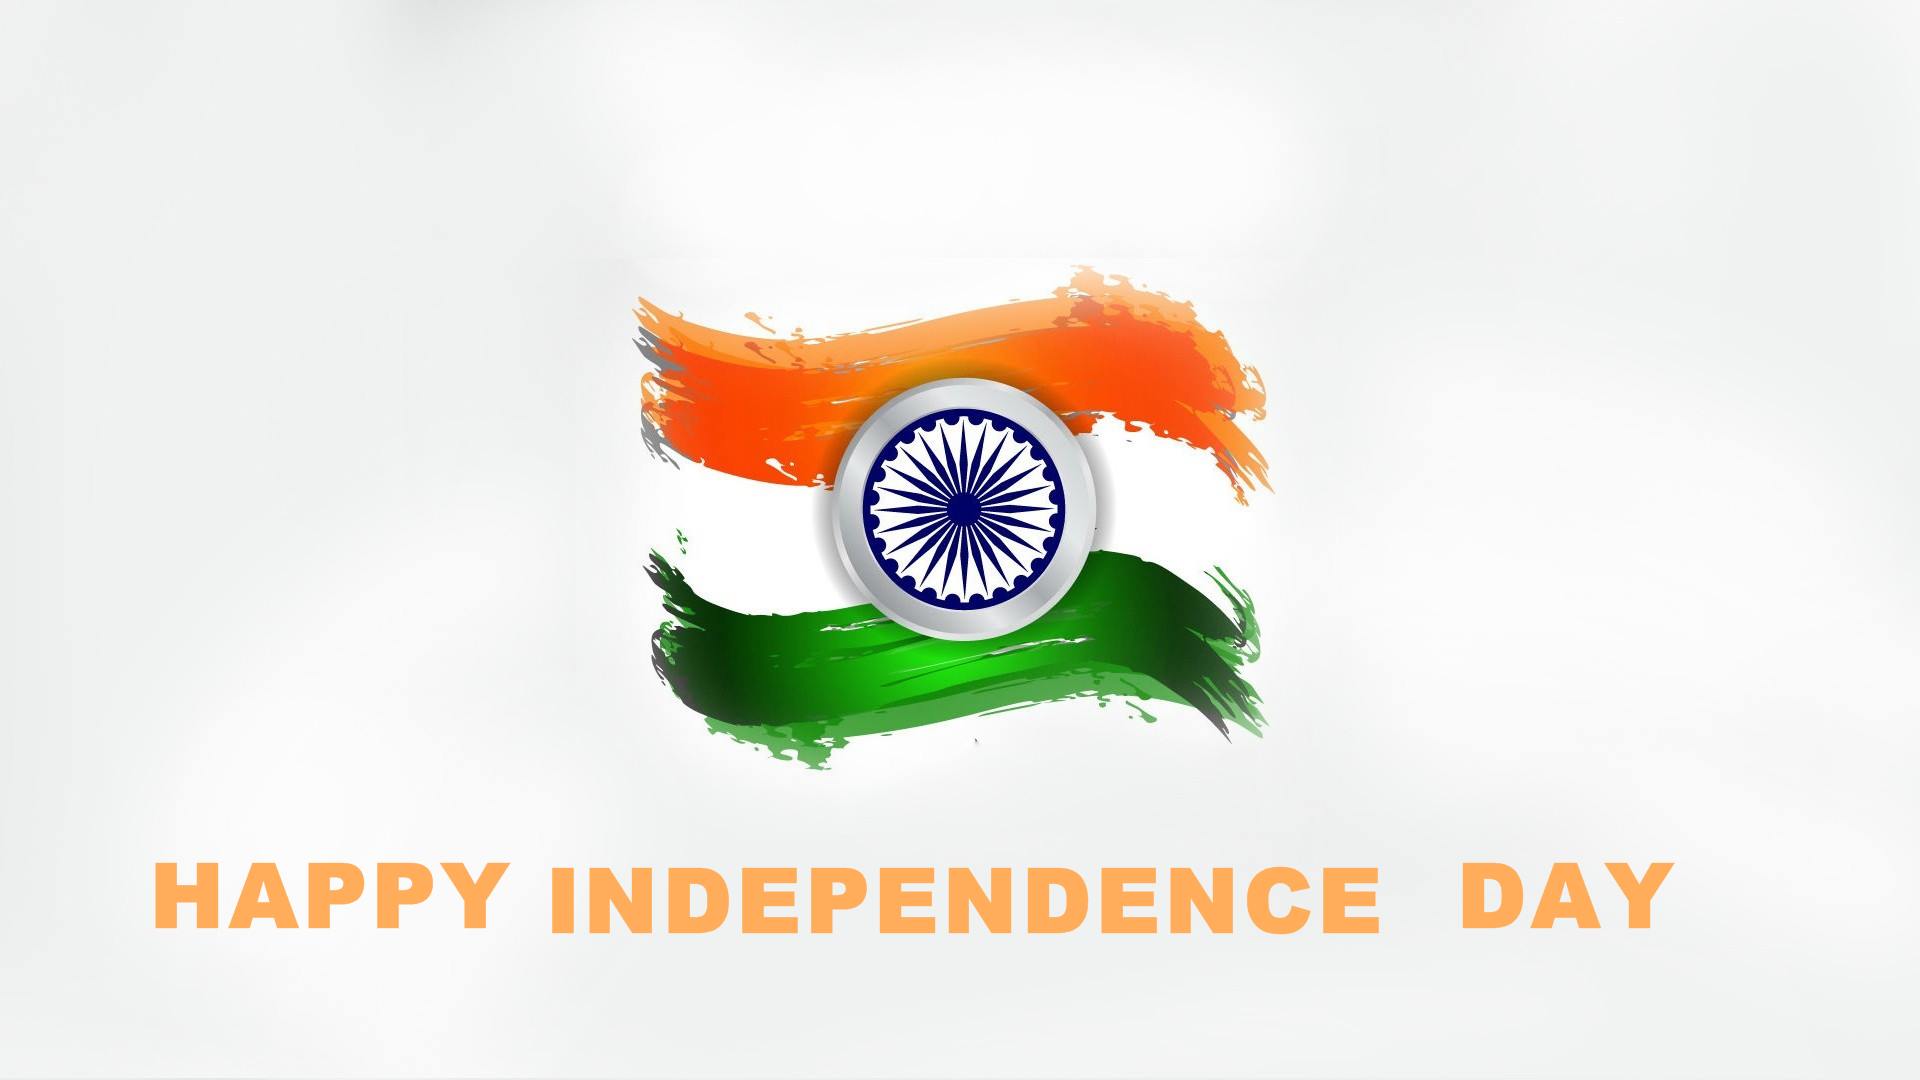 Happy Independence Day Indian 2018 Hd Wallpapers - Birthday Banner - HD Wallpaper 